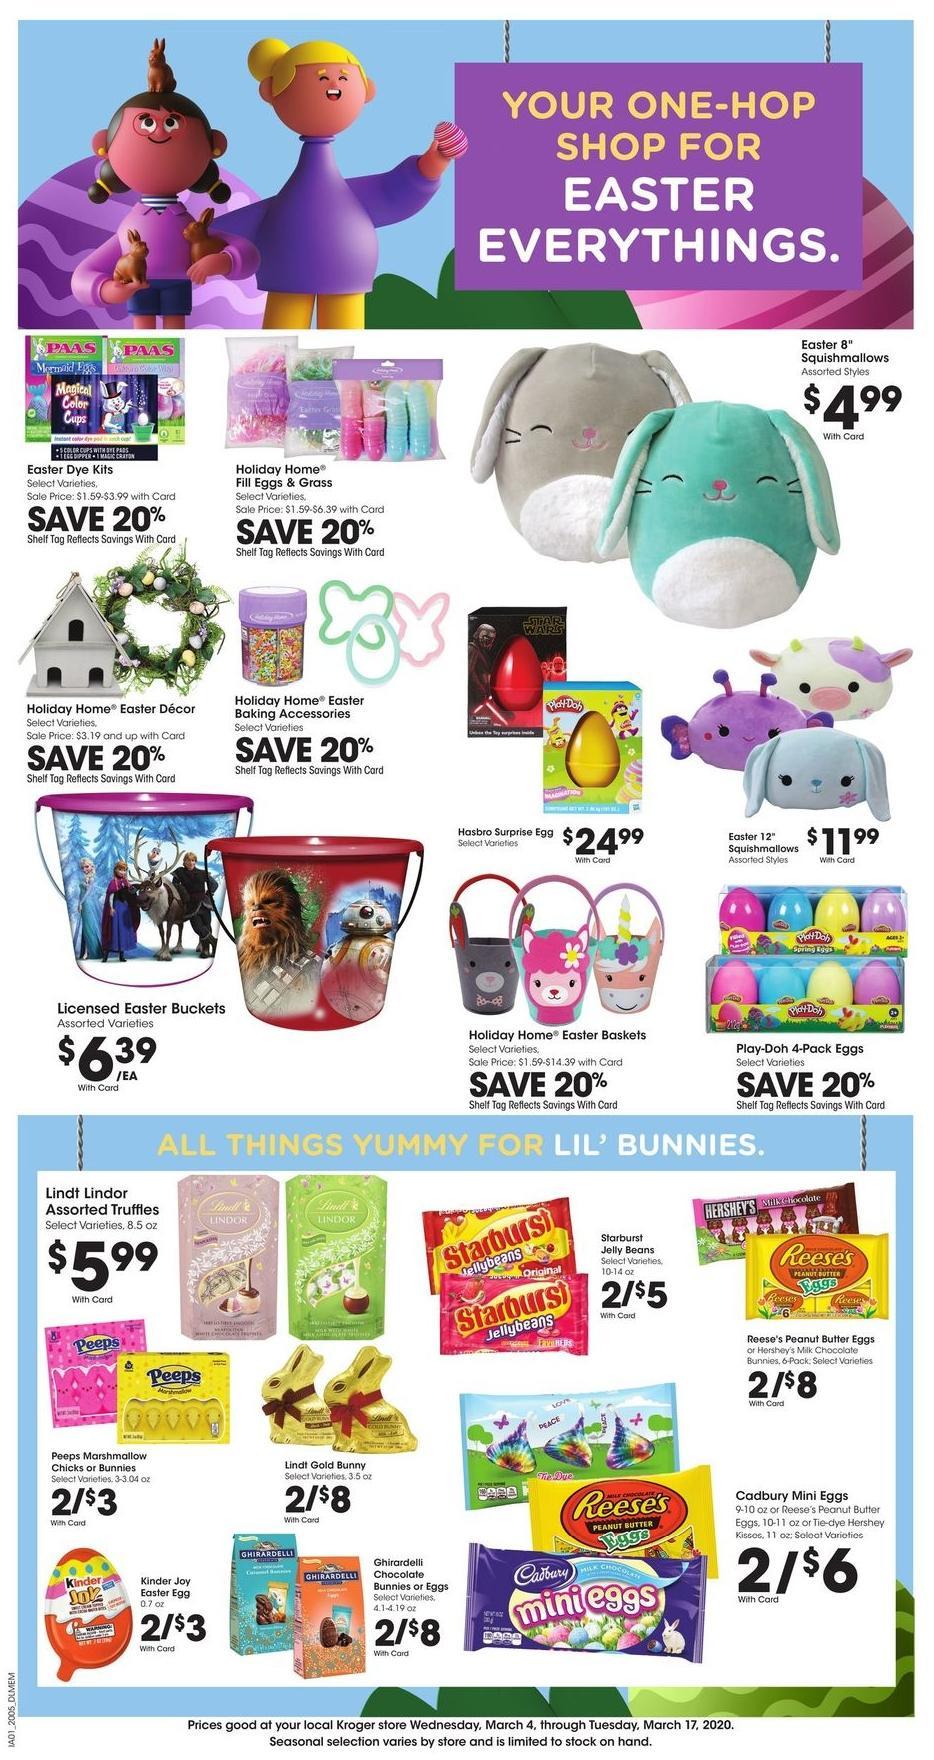 Kroger Weekly Ad from March 11